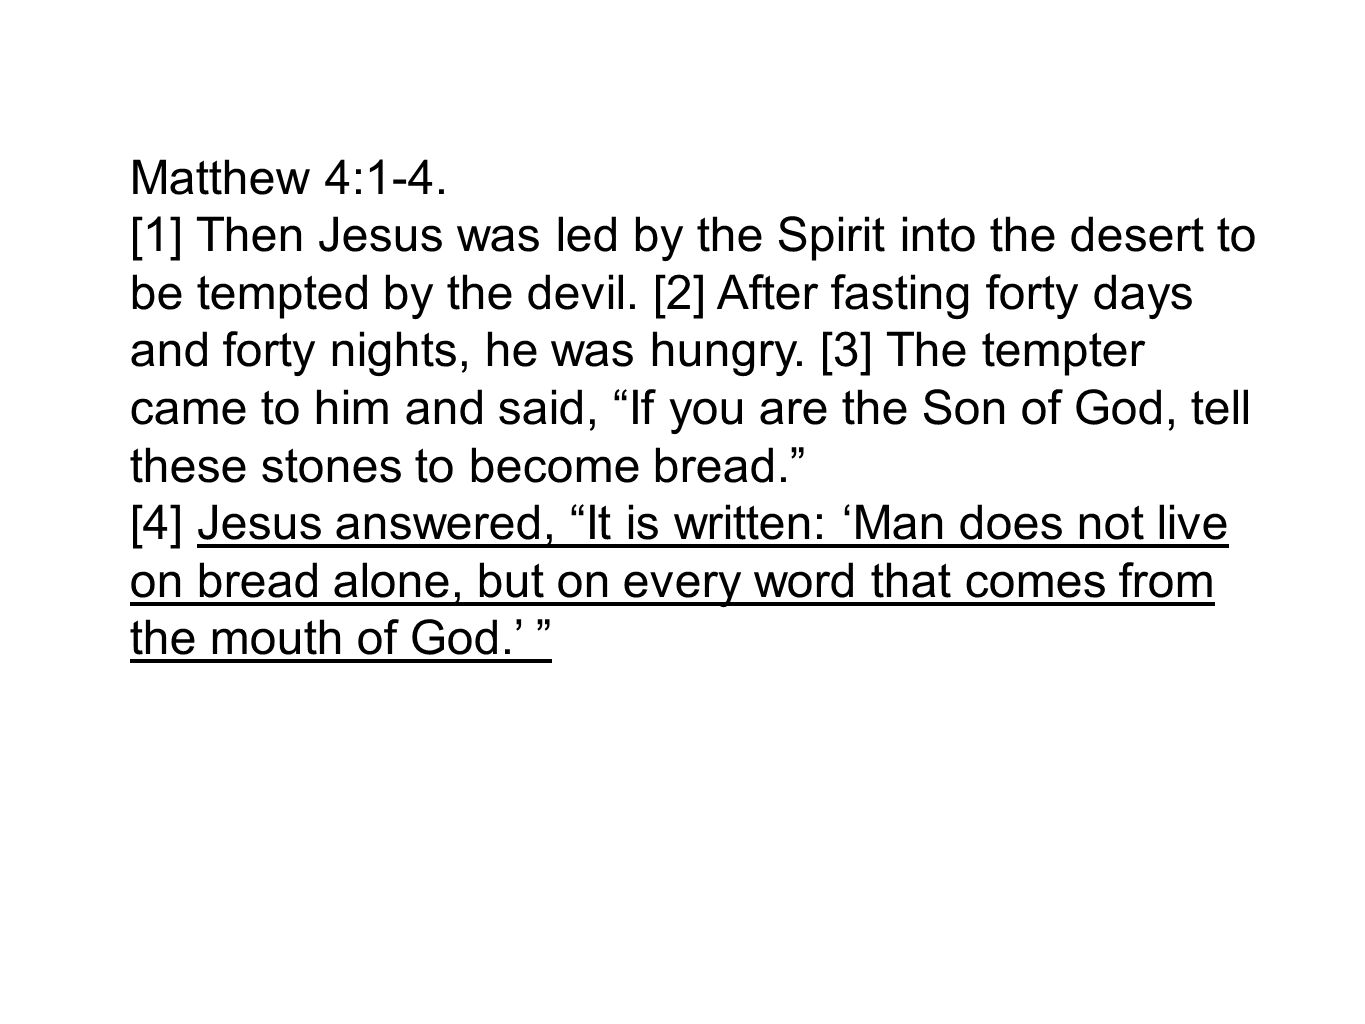 Matthew 4:1-4. [1] Then Jesus was led by the Spirit into the desert to be tempted by the devil.